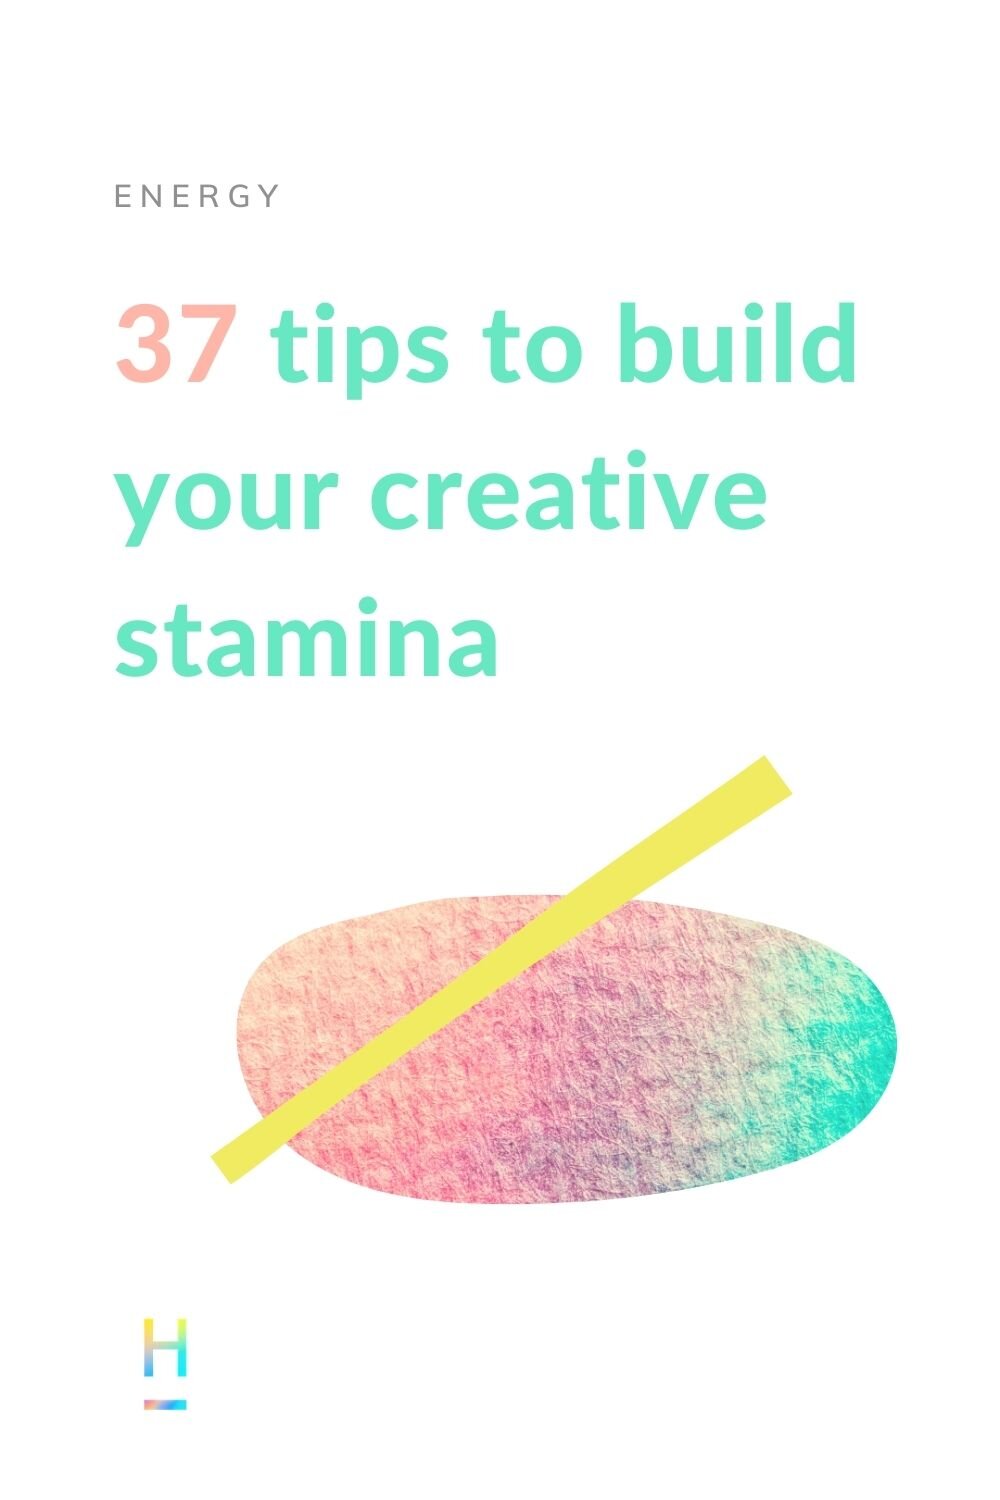 37 tips to build your creative stamina (Copy)